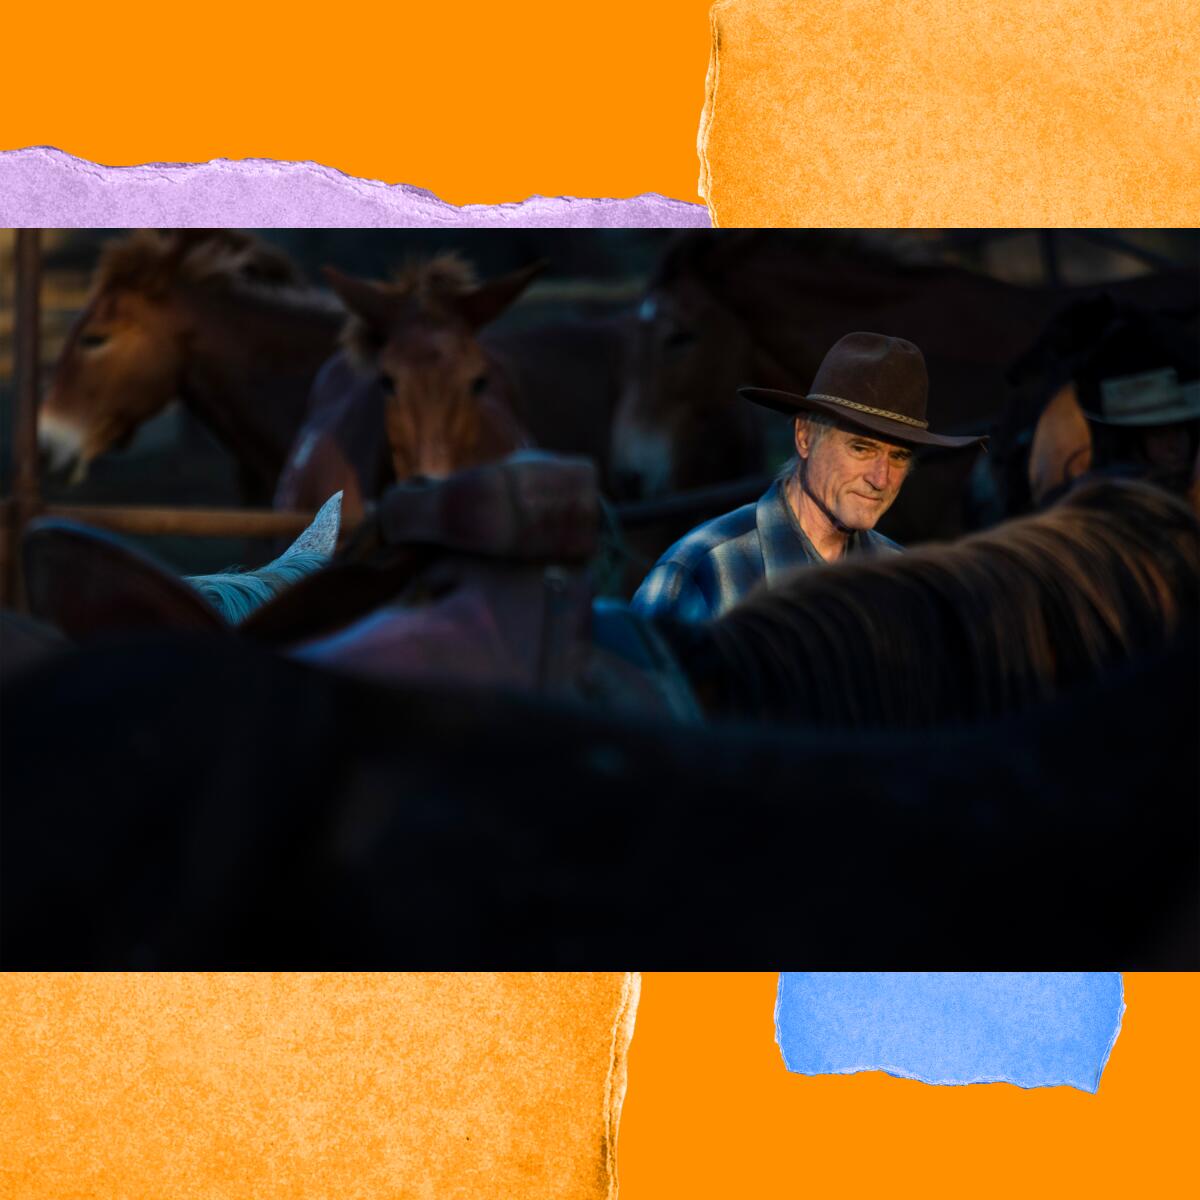 The face of a man in a cowboy hat is seen over the back of a saddled horse.